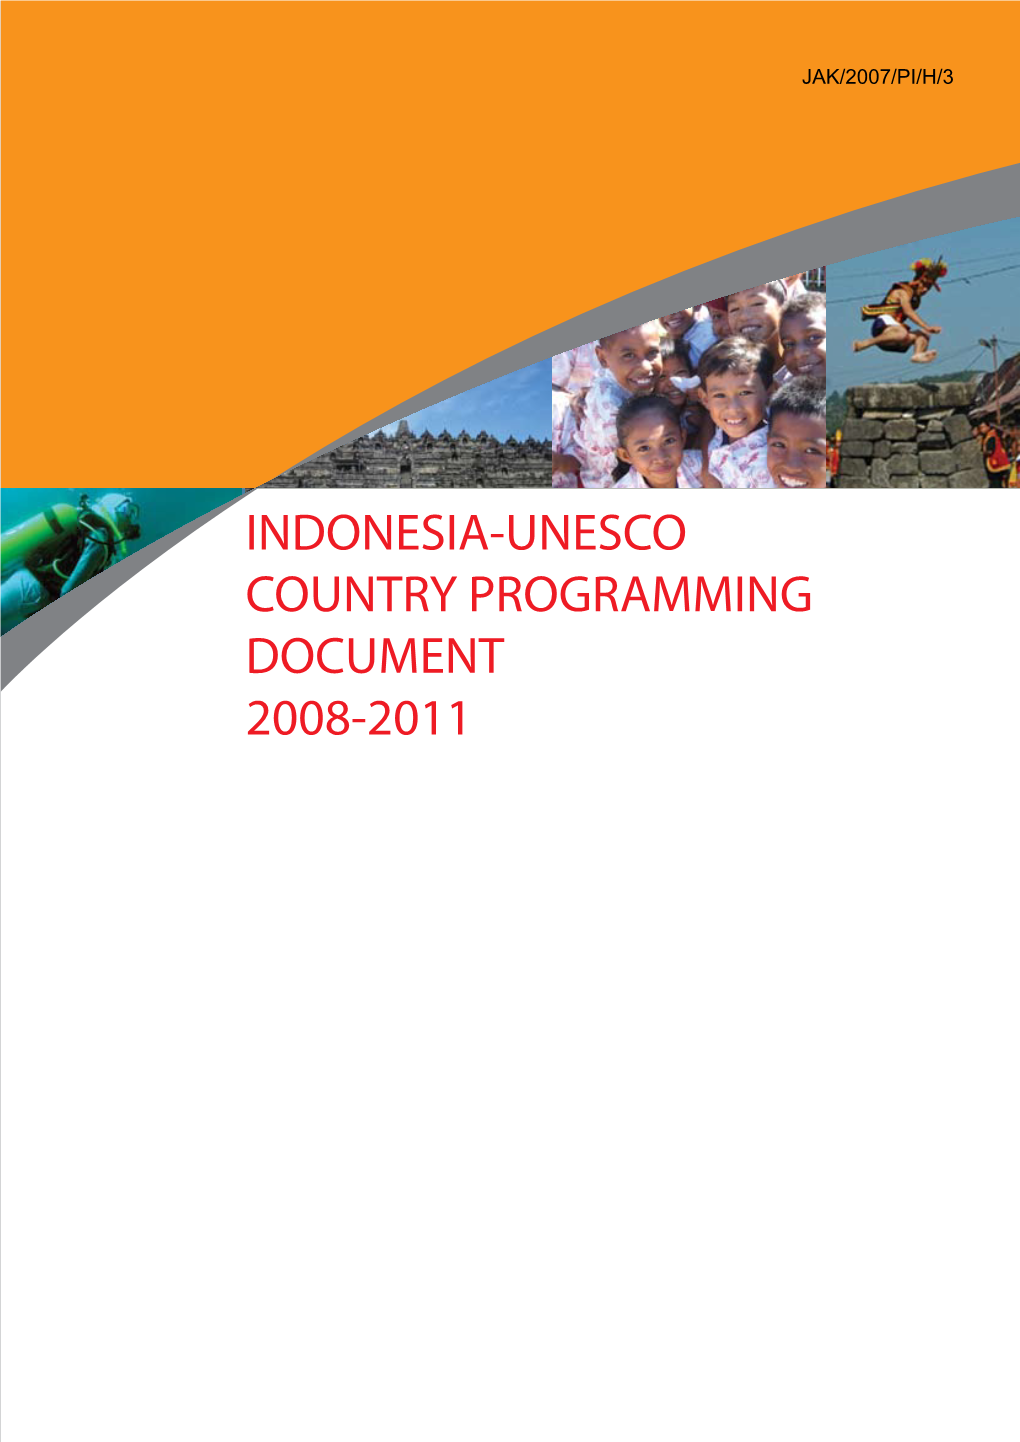 Indonesia-Unesco Country Programming Document 2008-2011 Table of Contents